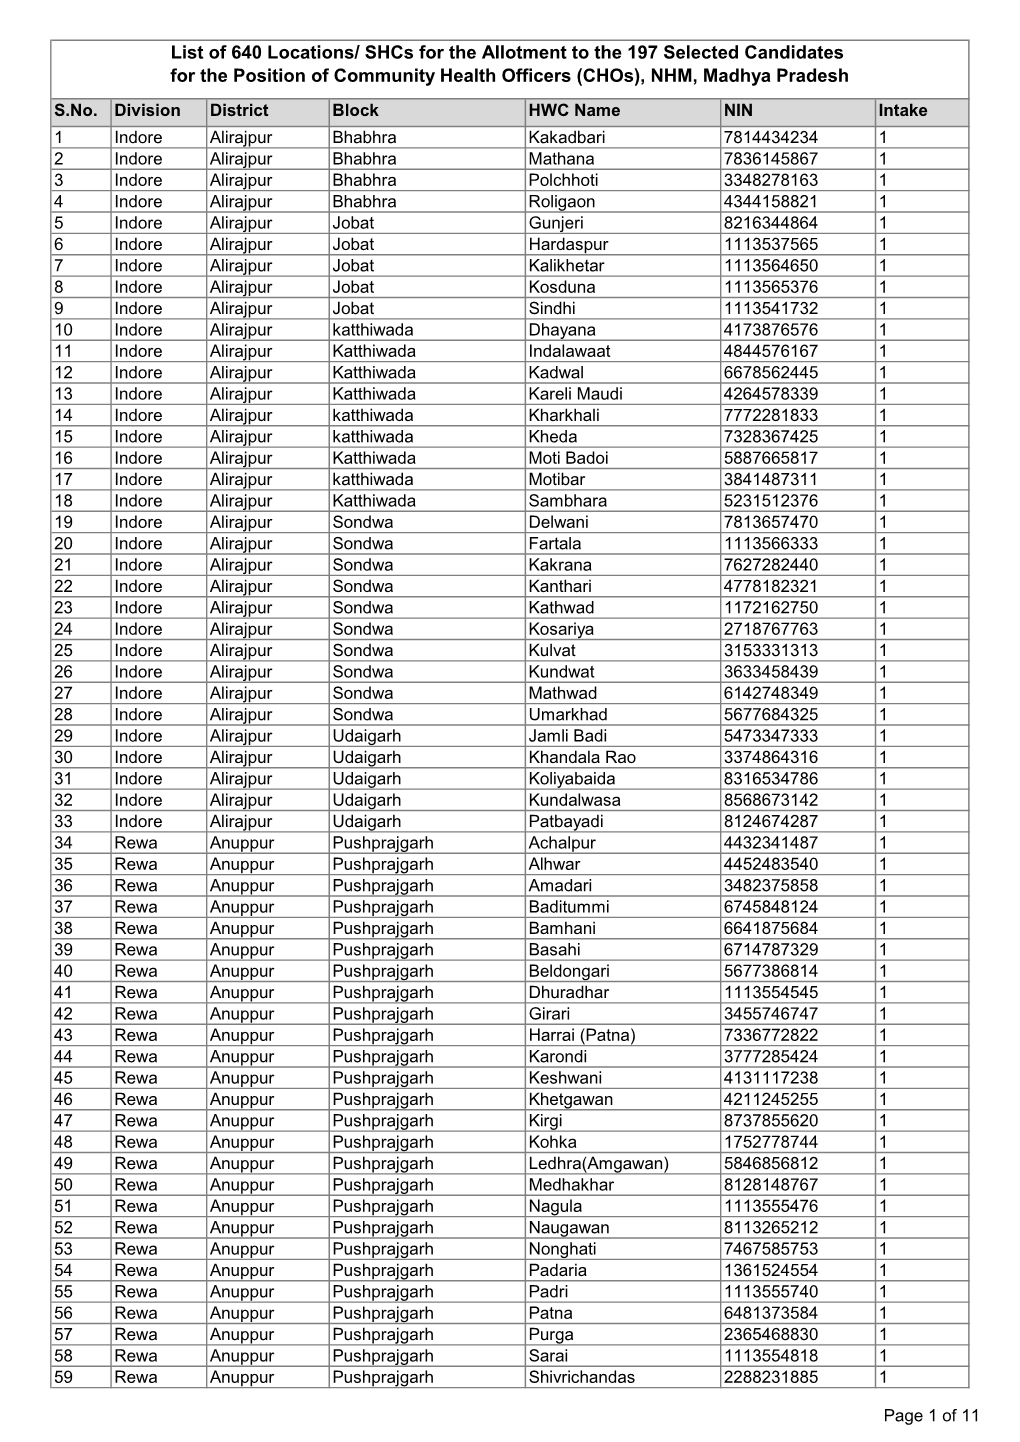 List of 640 Locations/ Shcs for the Allotment to the 197 Selected Candidates for the Position of Community Health Officers (Chos), NHM, Madhya Pradesh S.No